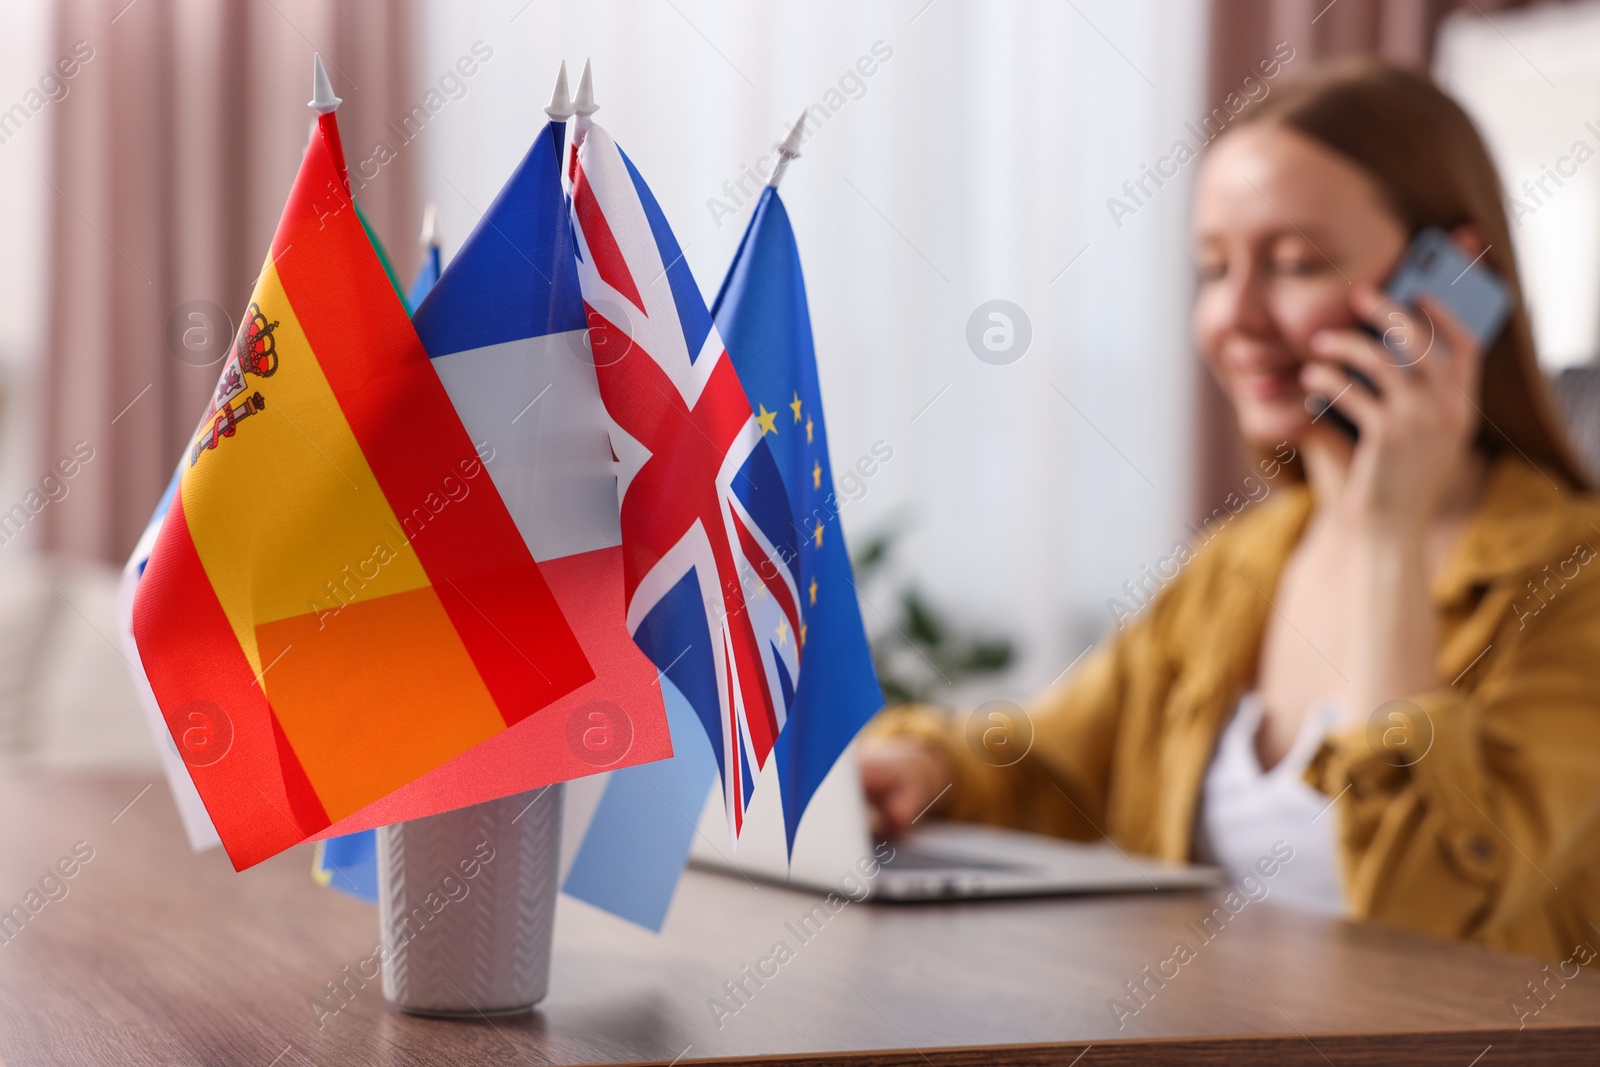 Photo of Woman talking on smartphone at table indoors, focus on different flags